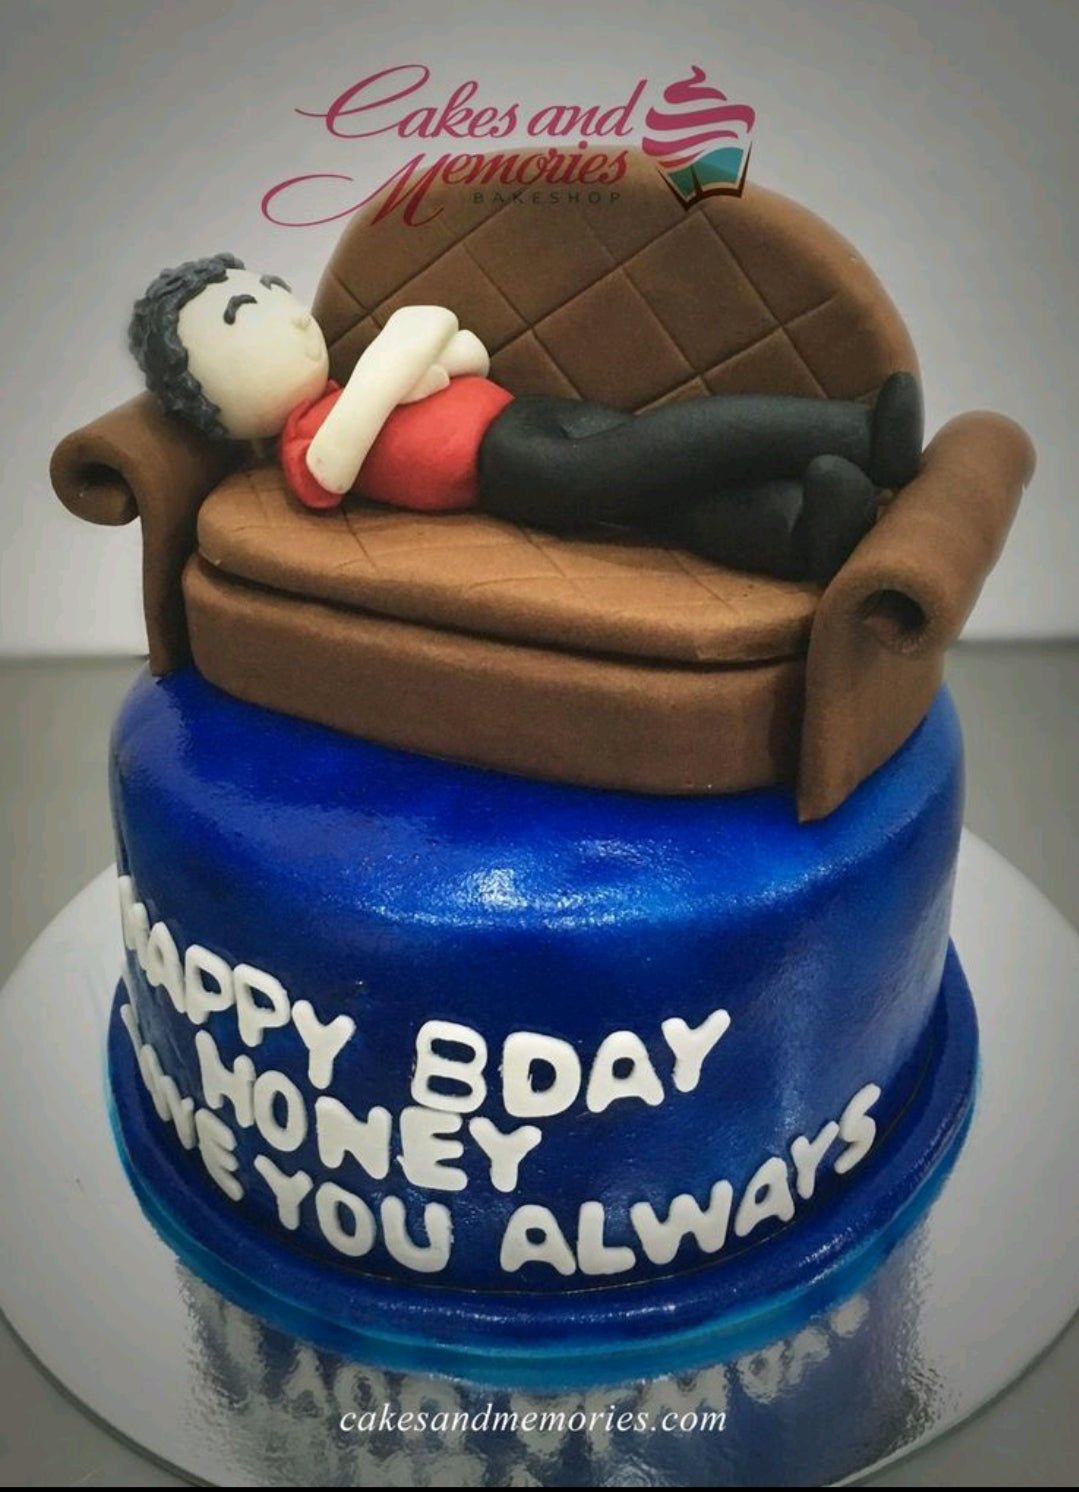 Super Dad Cake by bakisto - the cake company in lahore